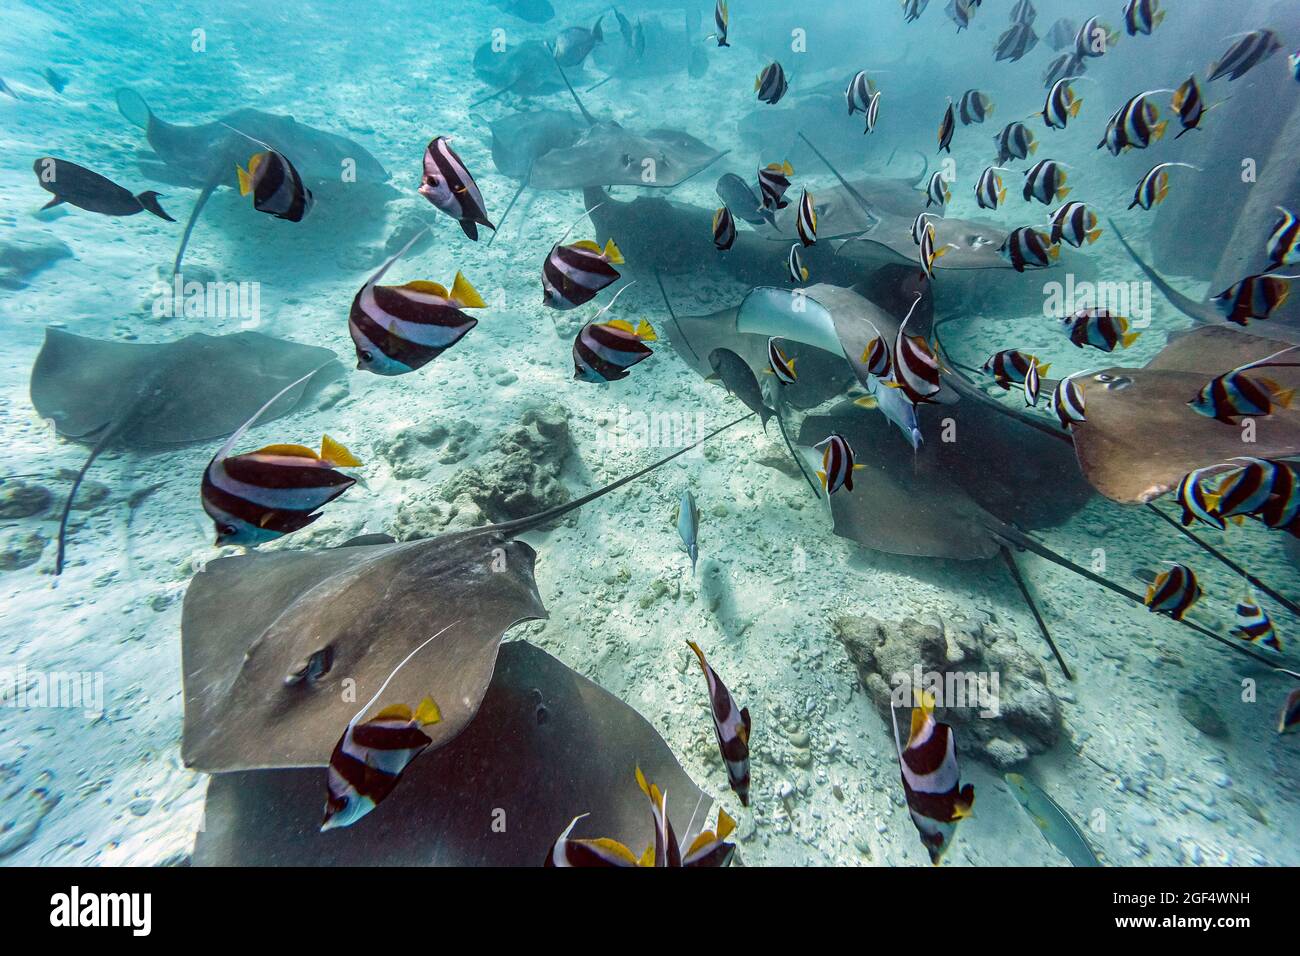 School of fishes and stingrays swimming in sea Stock Photo